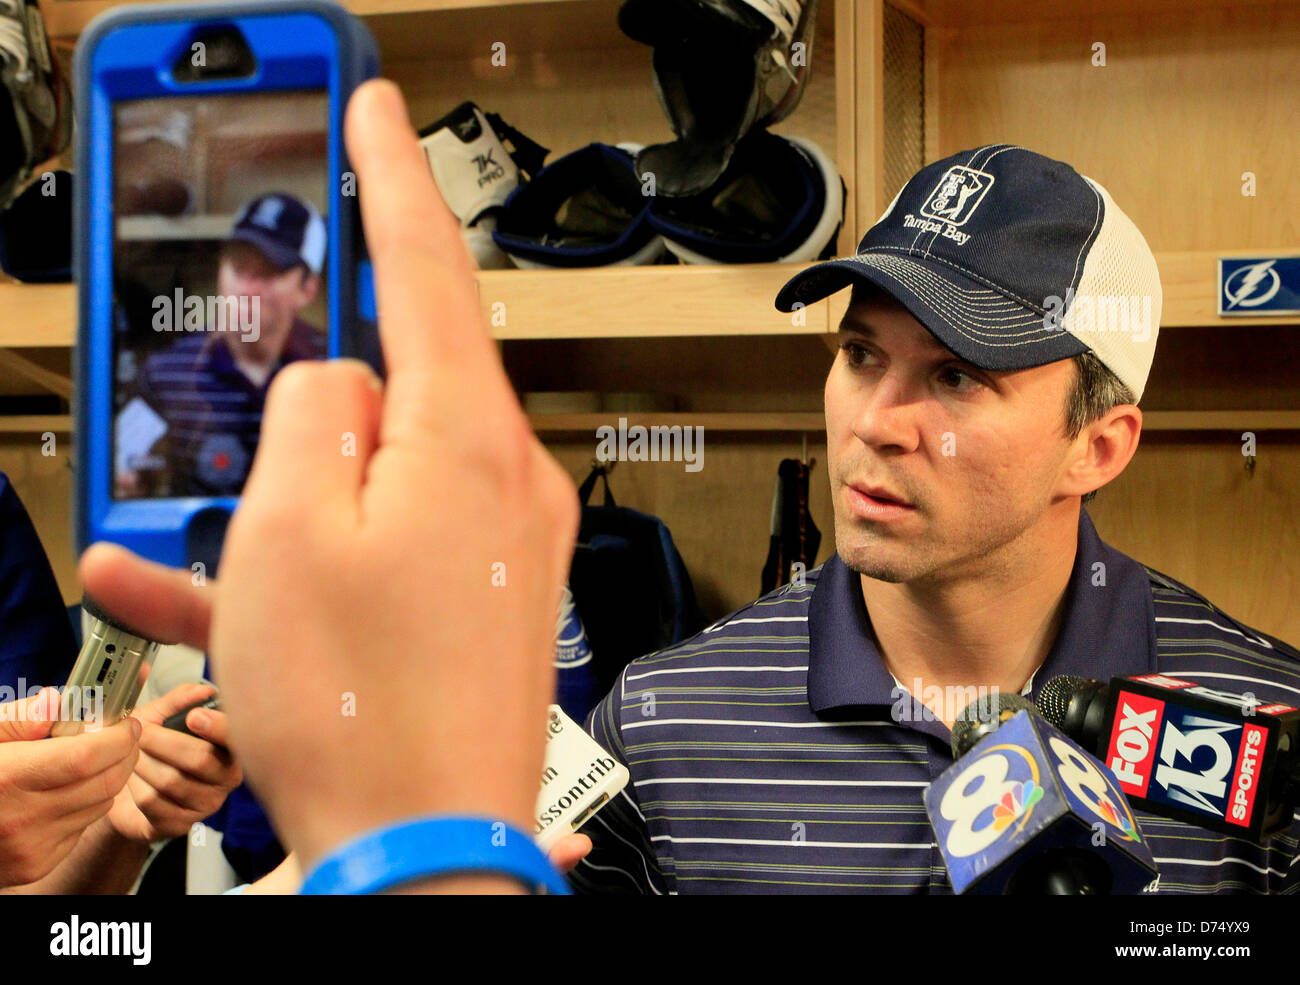 Tampa, Florida, USA. 29th April, 2013. Tampa Bay Lightning Marty St. Louis talks with the media in the locker room as the Lightning's season comes to a close with another season of not making the playoffs at the Tampa Bay Times Forum in Tampa monday morning 04/29/13. St. Louis and Steven Stamkos were the NHL's top two point producers and yet finished out of the playoffs for the fifth time in six years. St. Louis, the 37-year-old right wing became the oldest player to win an NHL points title with 60 on 17 goals and a league-best 43 assists. Extrapolated over a normal 8 Stock Photo